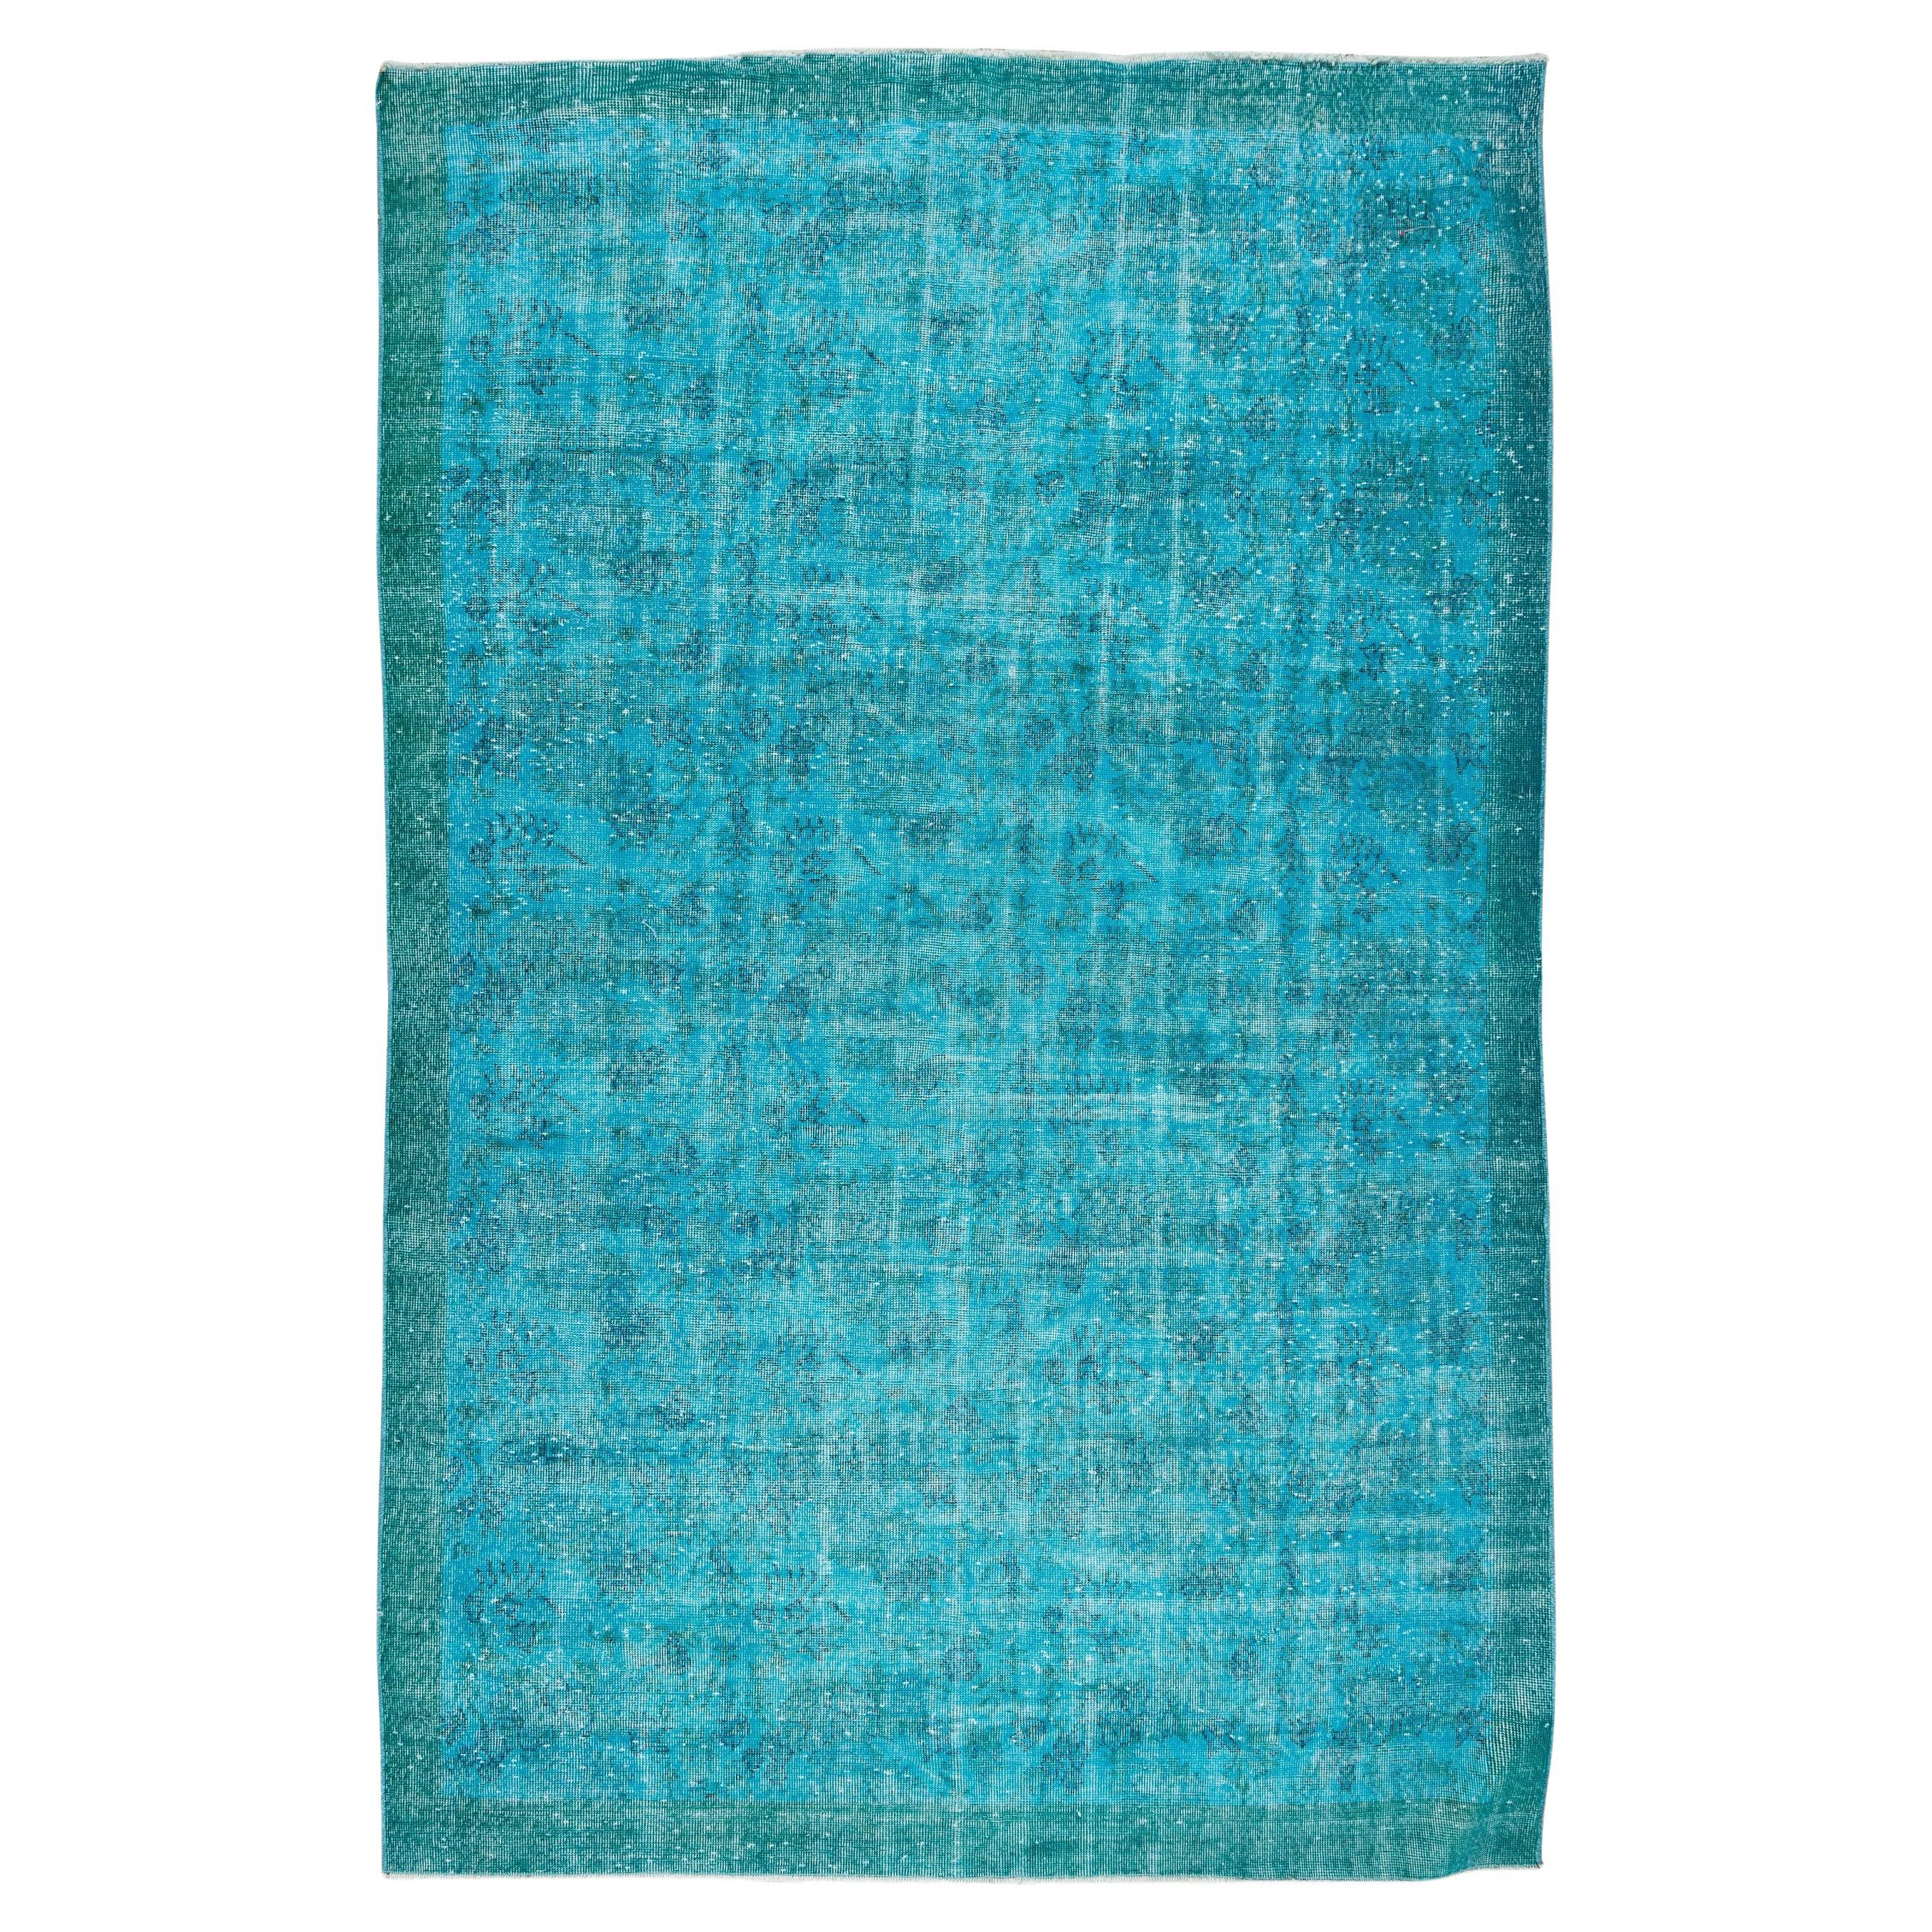 6.6x10.3 Ft Handmade Vintage Turkish Rug Redyed in Teal Blue for Modern Interior